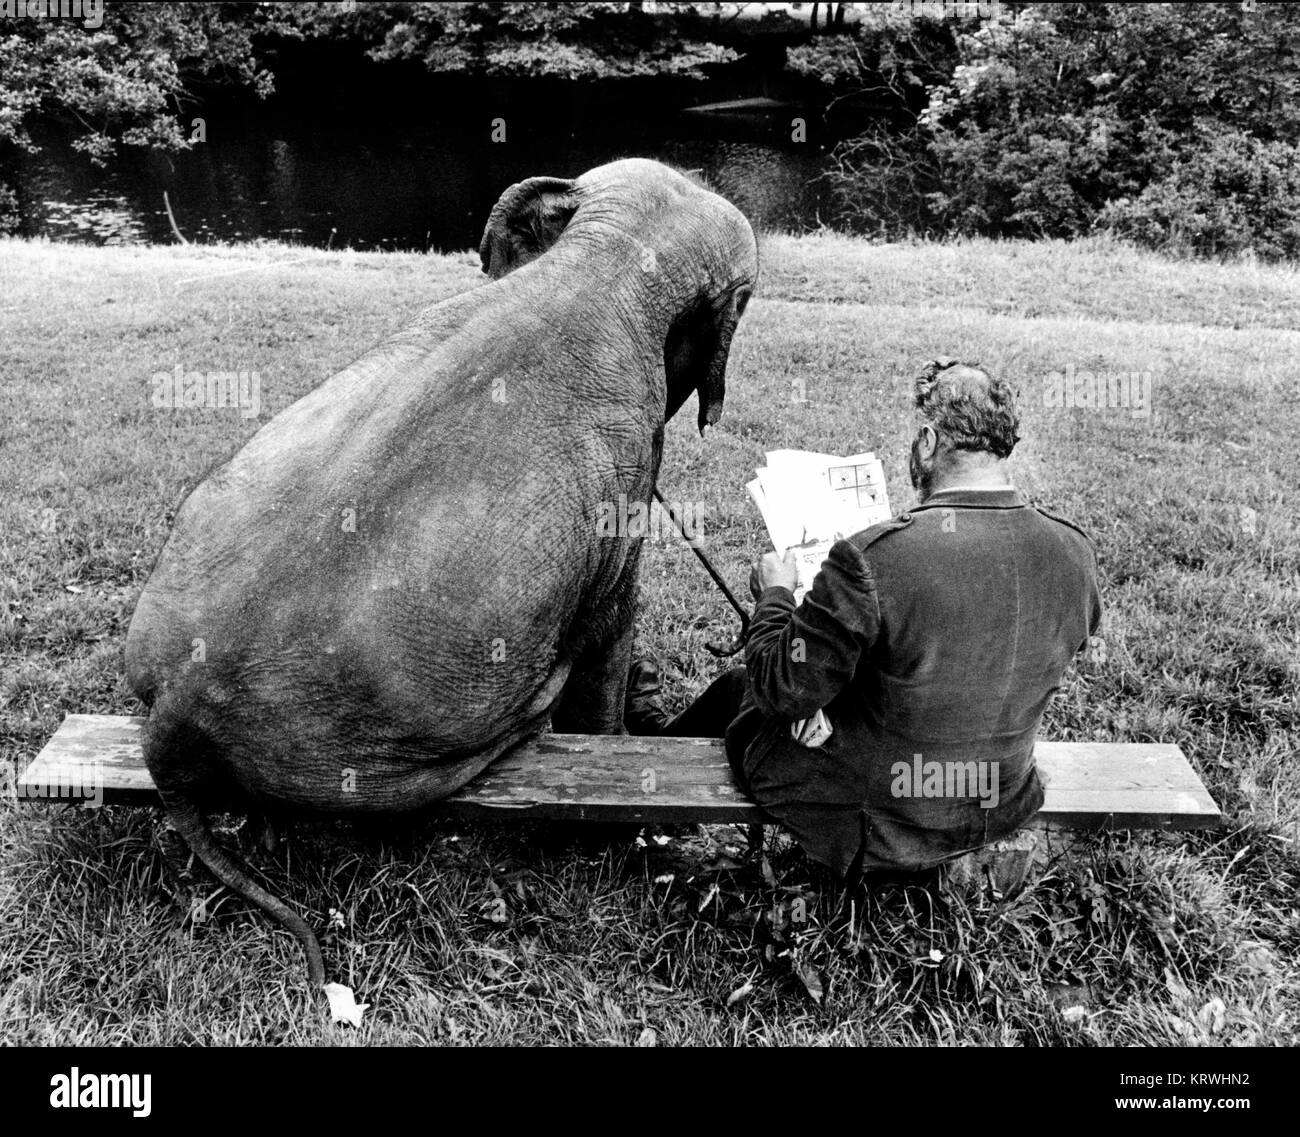 Elephant and man on park bench, England, Great Britain Stock Photo